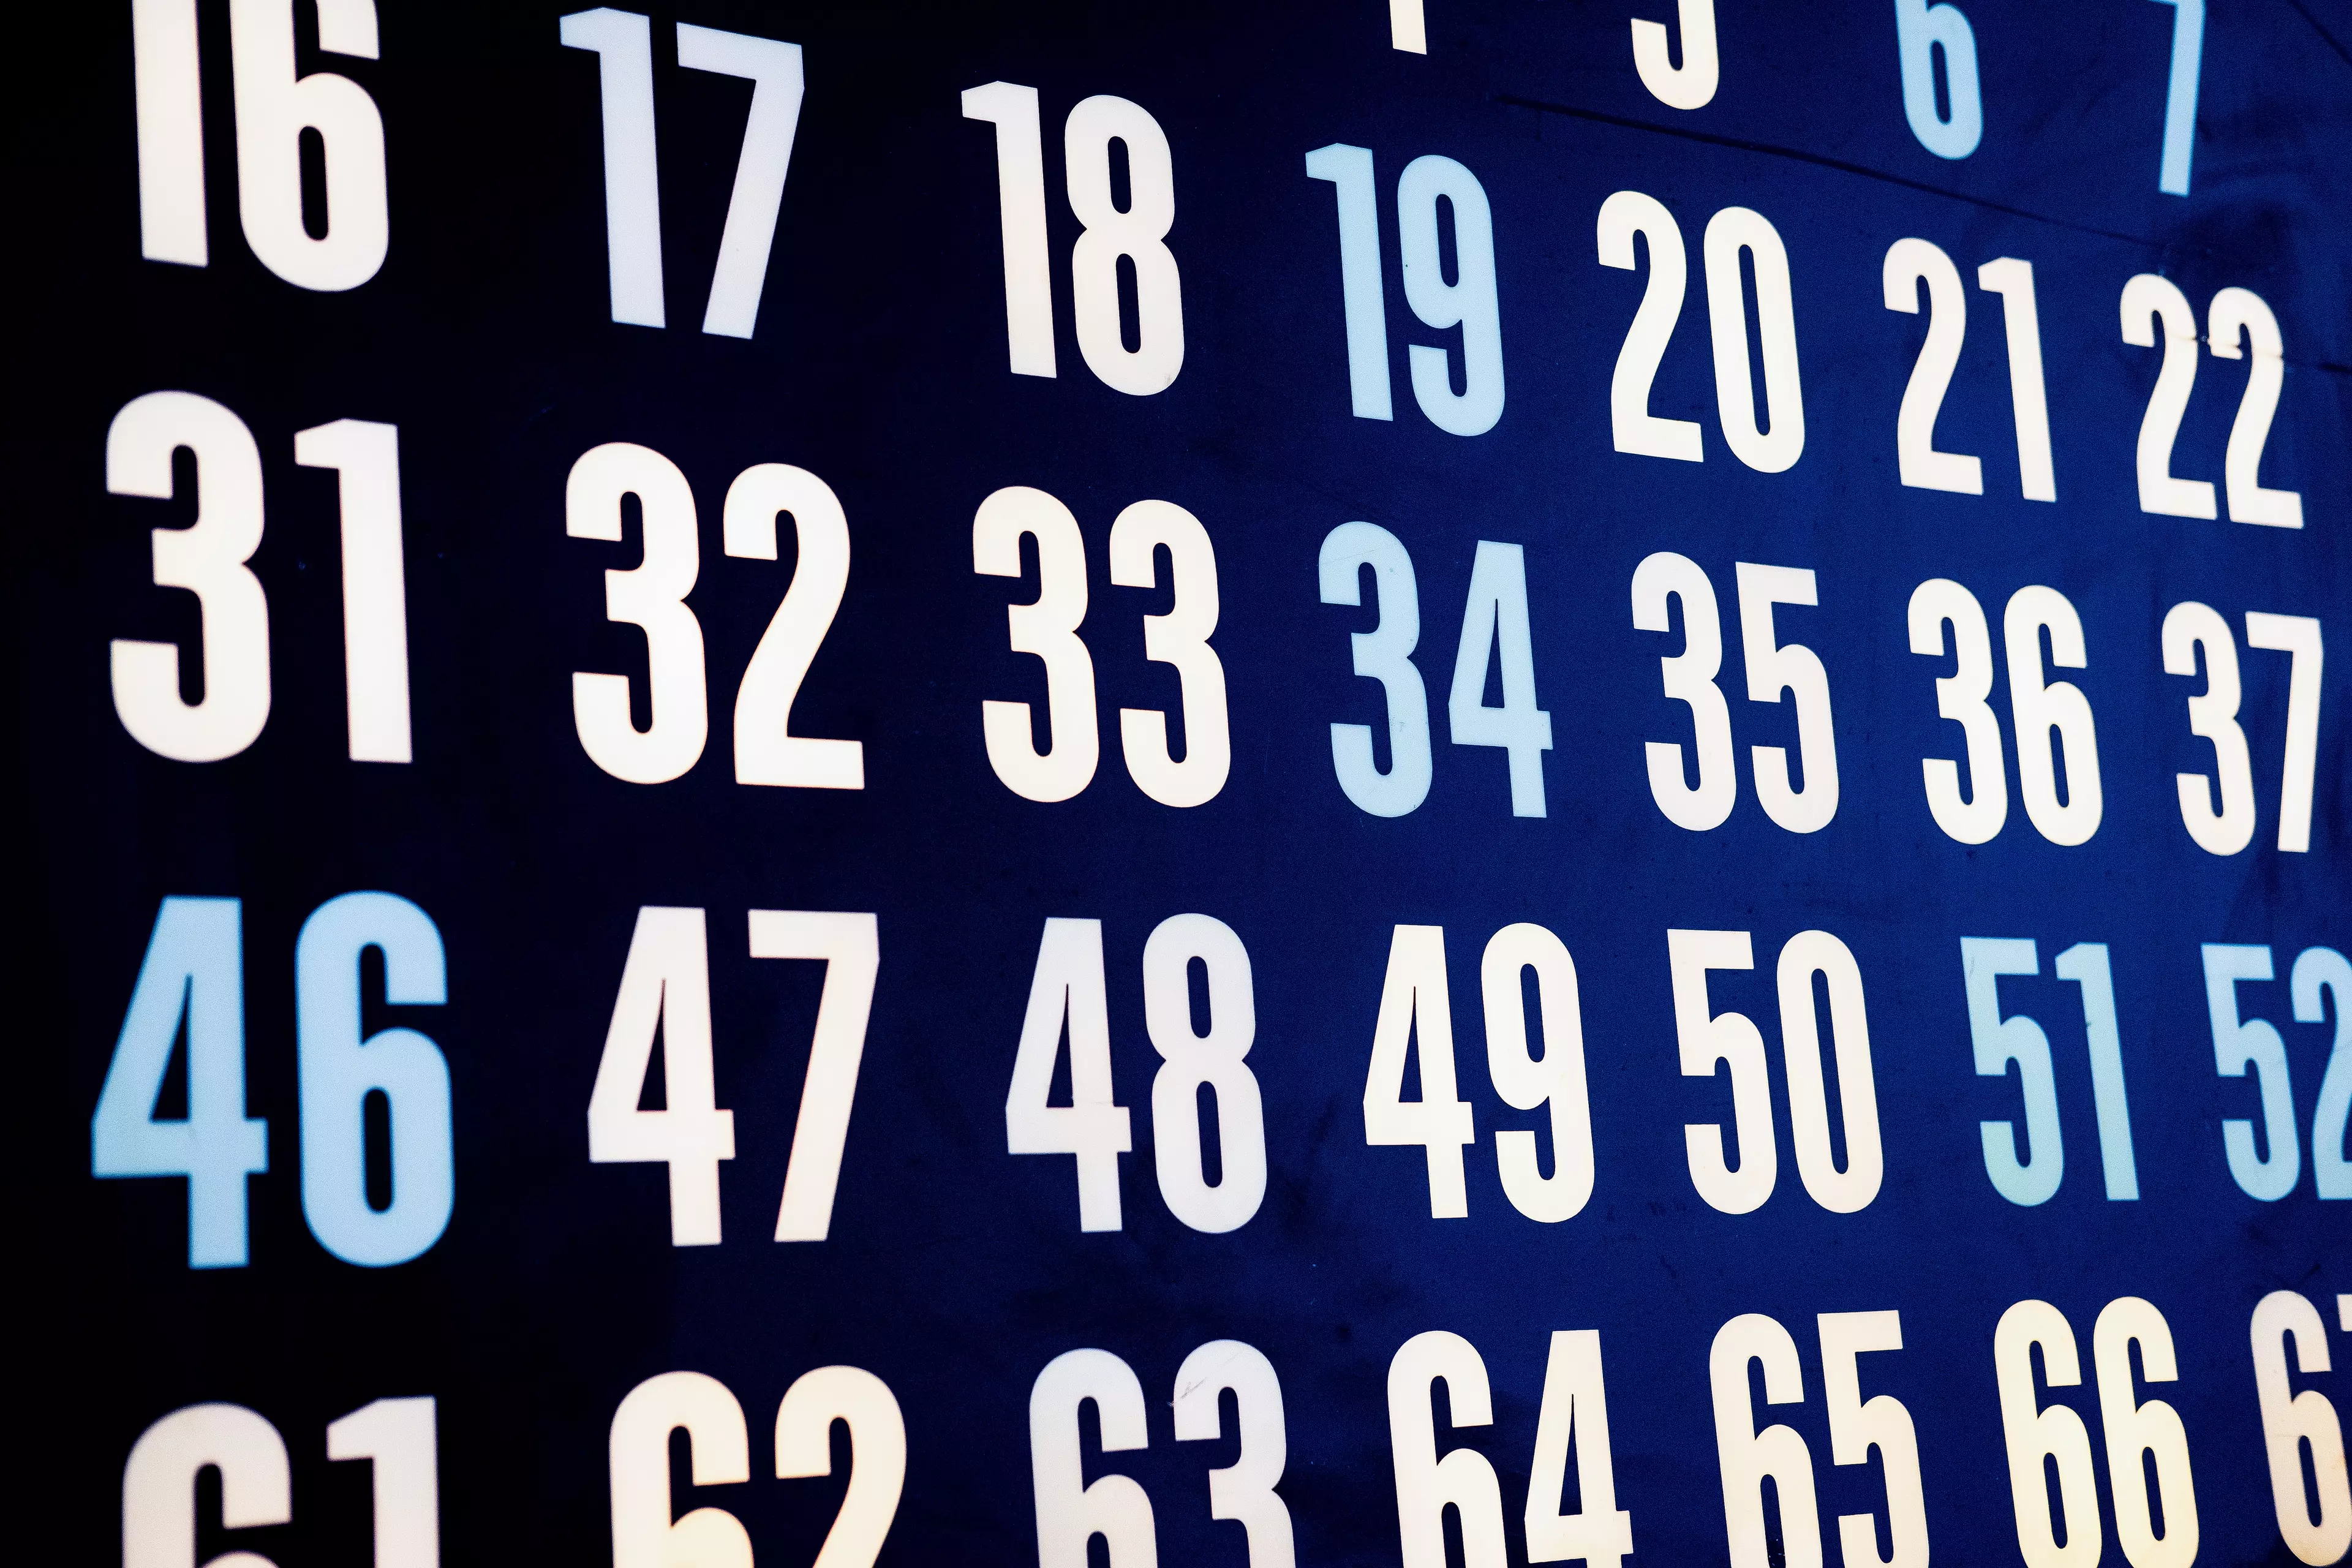 The online game works by generating your numbers using your mobile phone digits (